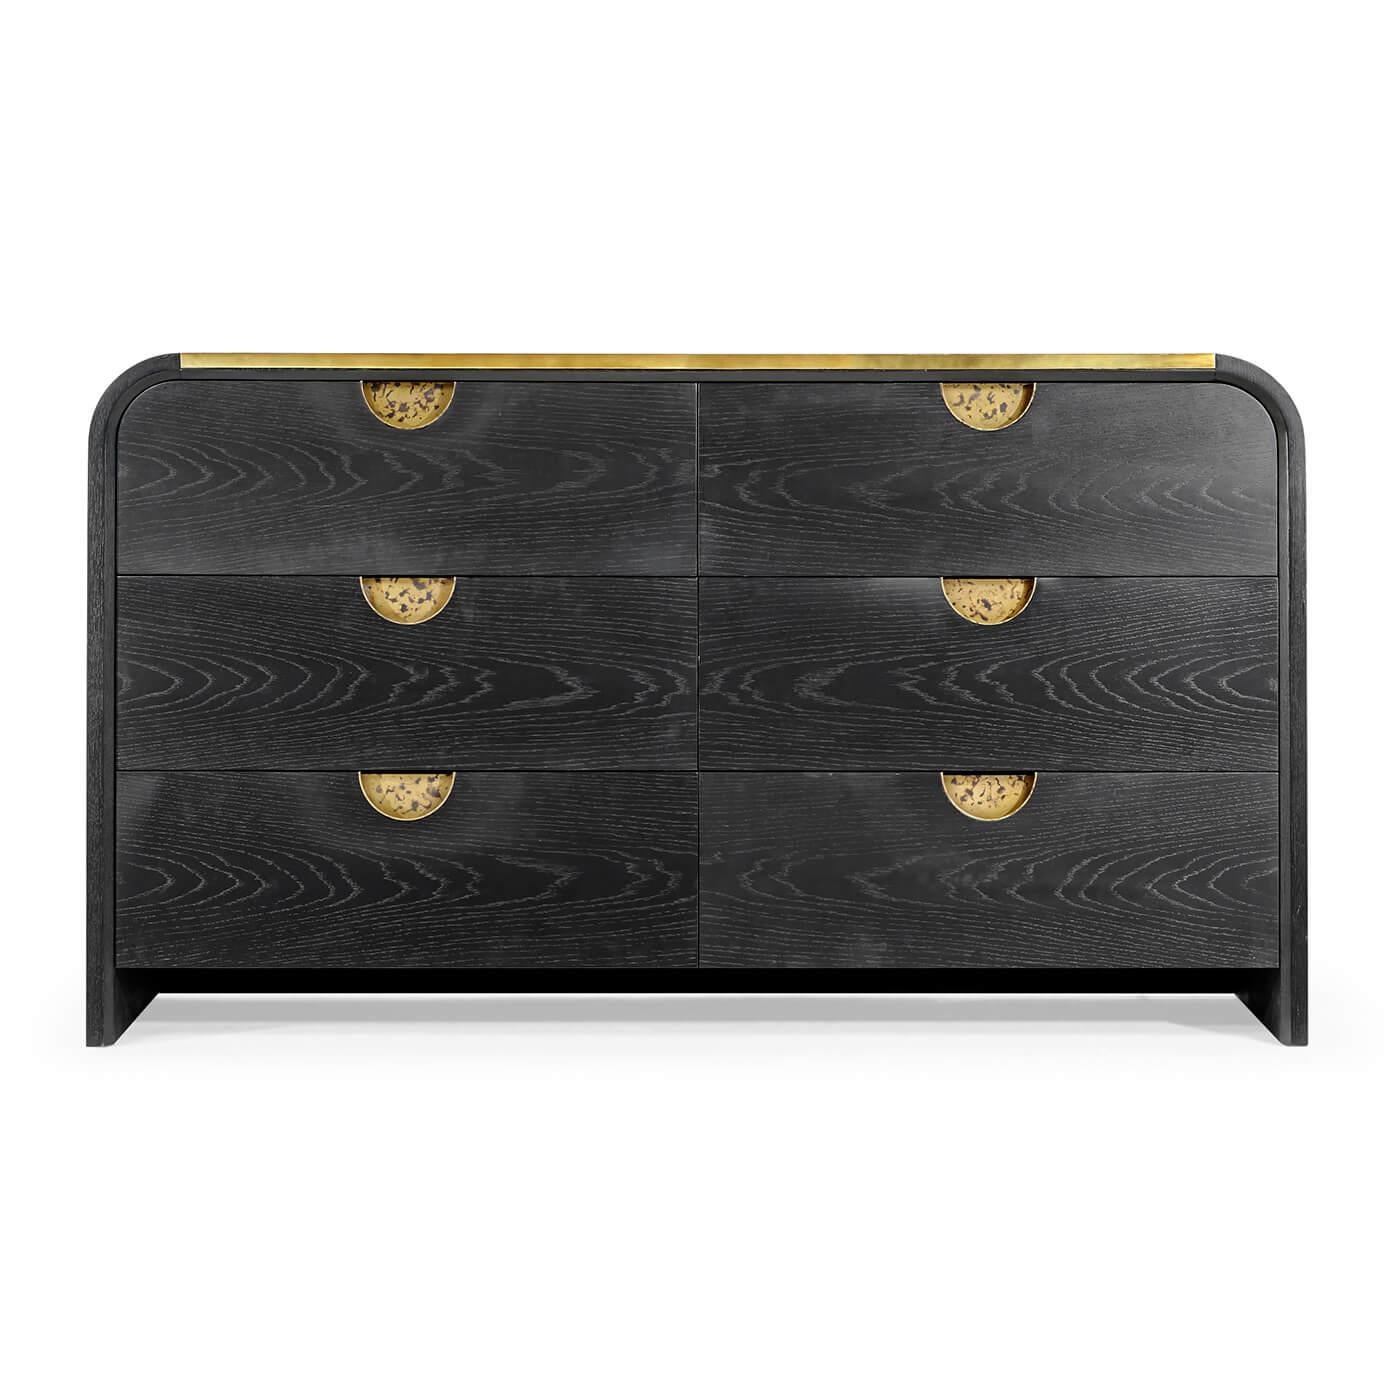 Mid-Century Modern style ebonized oak six-drawer dresser with an applied brass top and handles.

Dimensions: 64